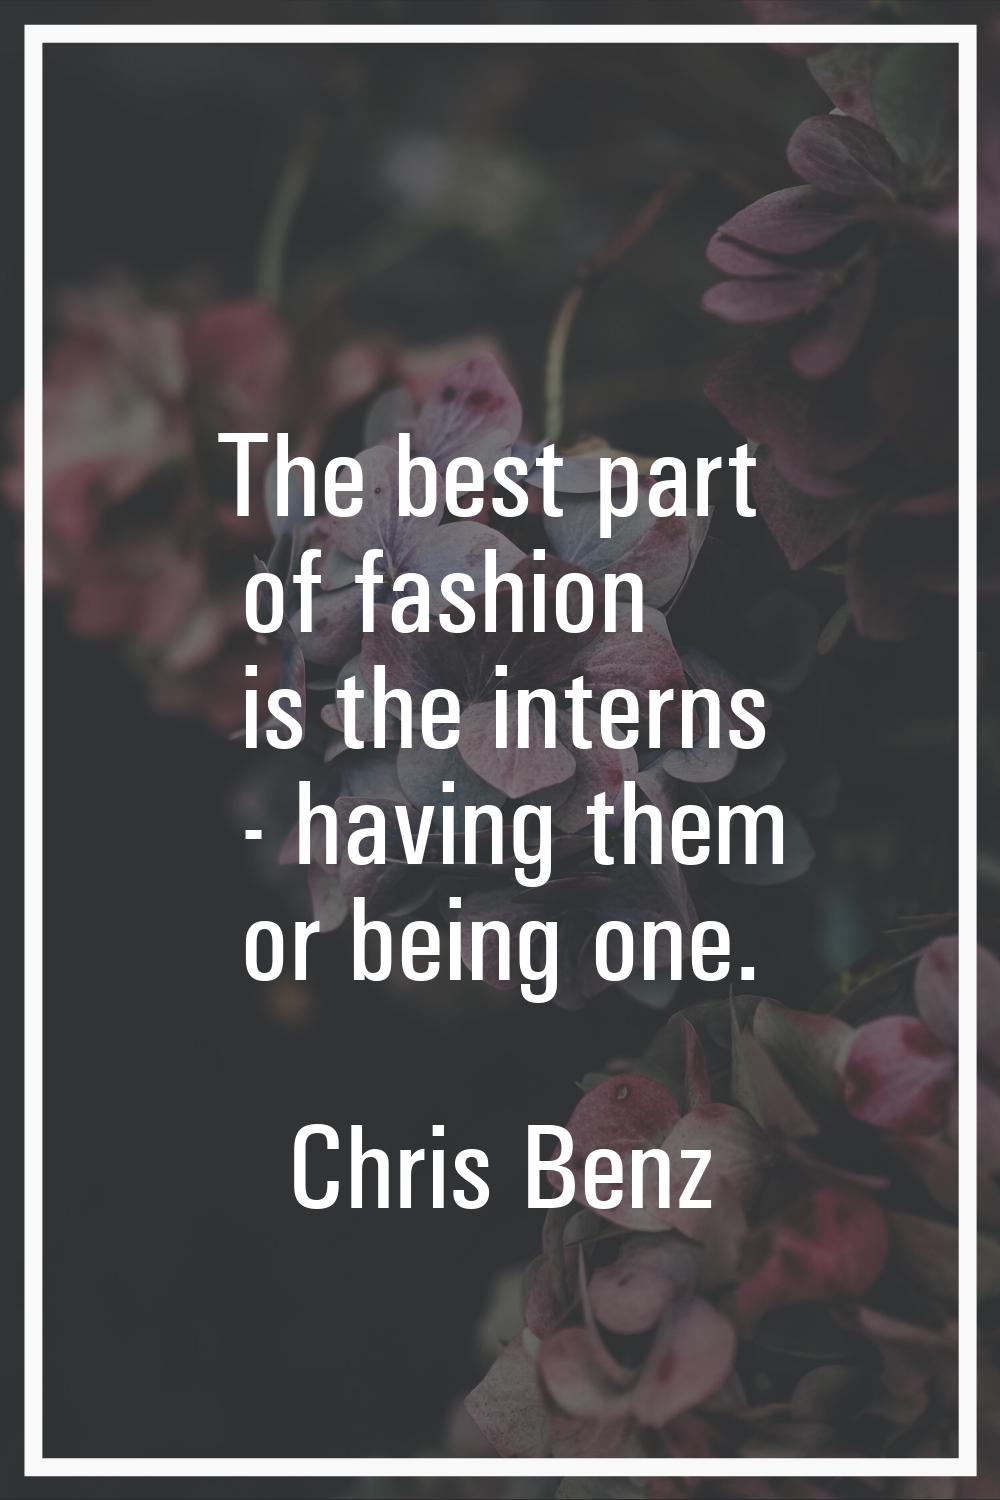 The best part of fashion is the interns - having them or being one.